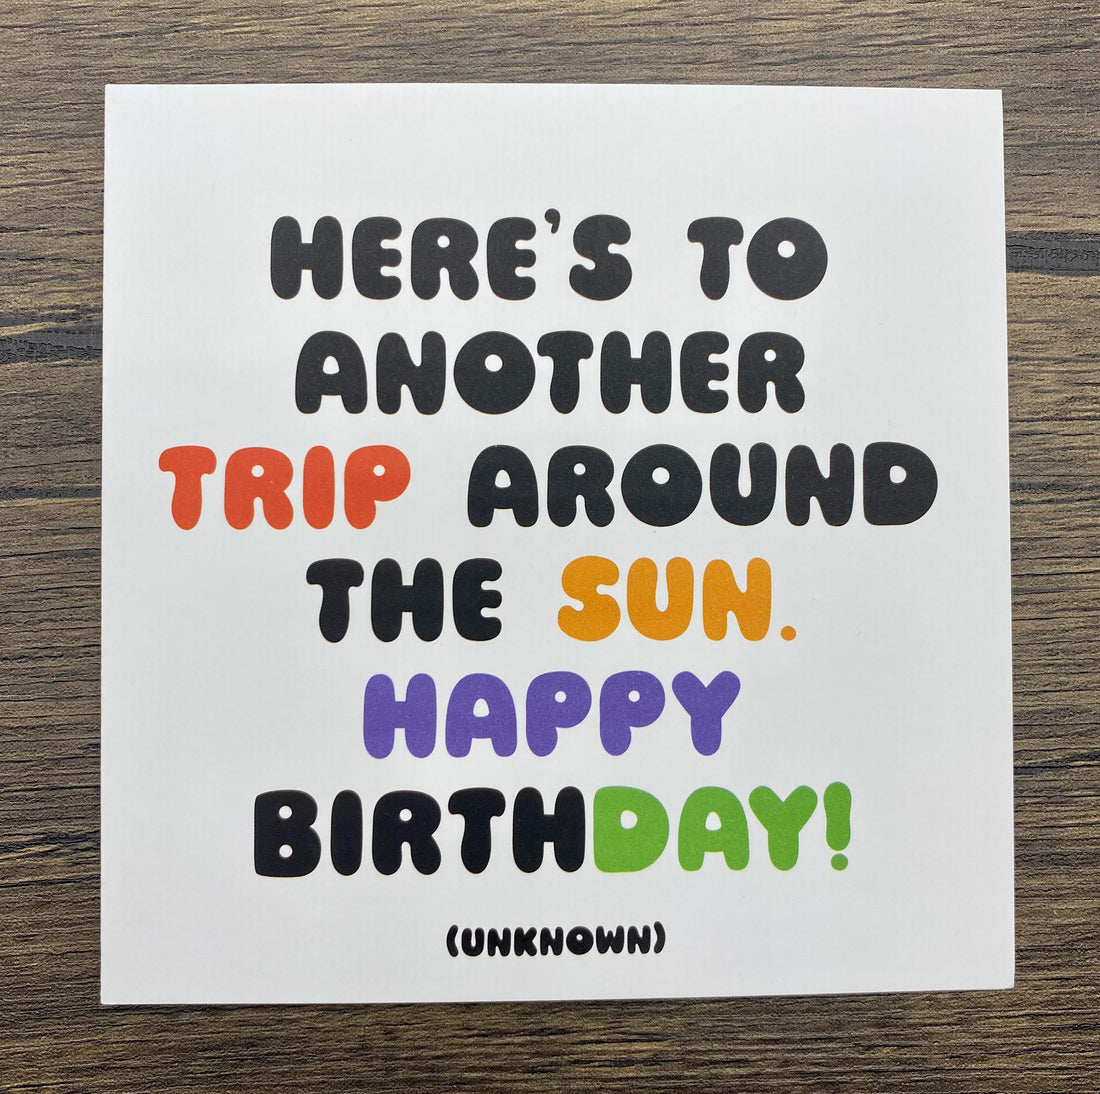 Quotable Card: Here's to another trip around...